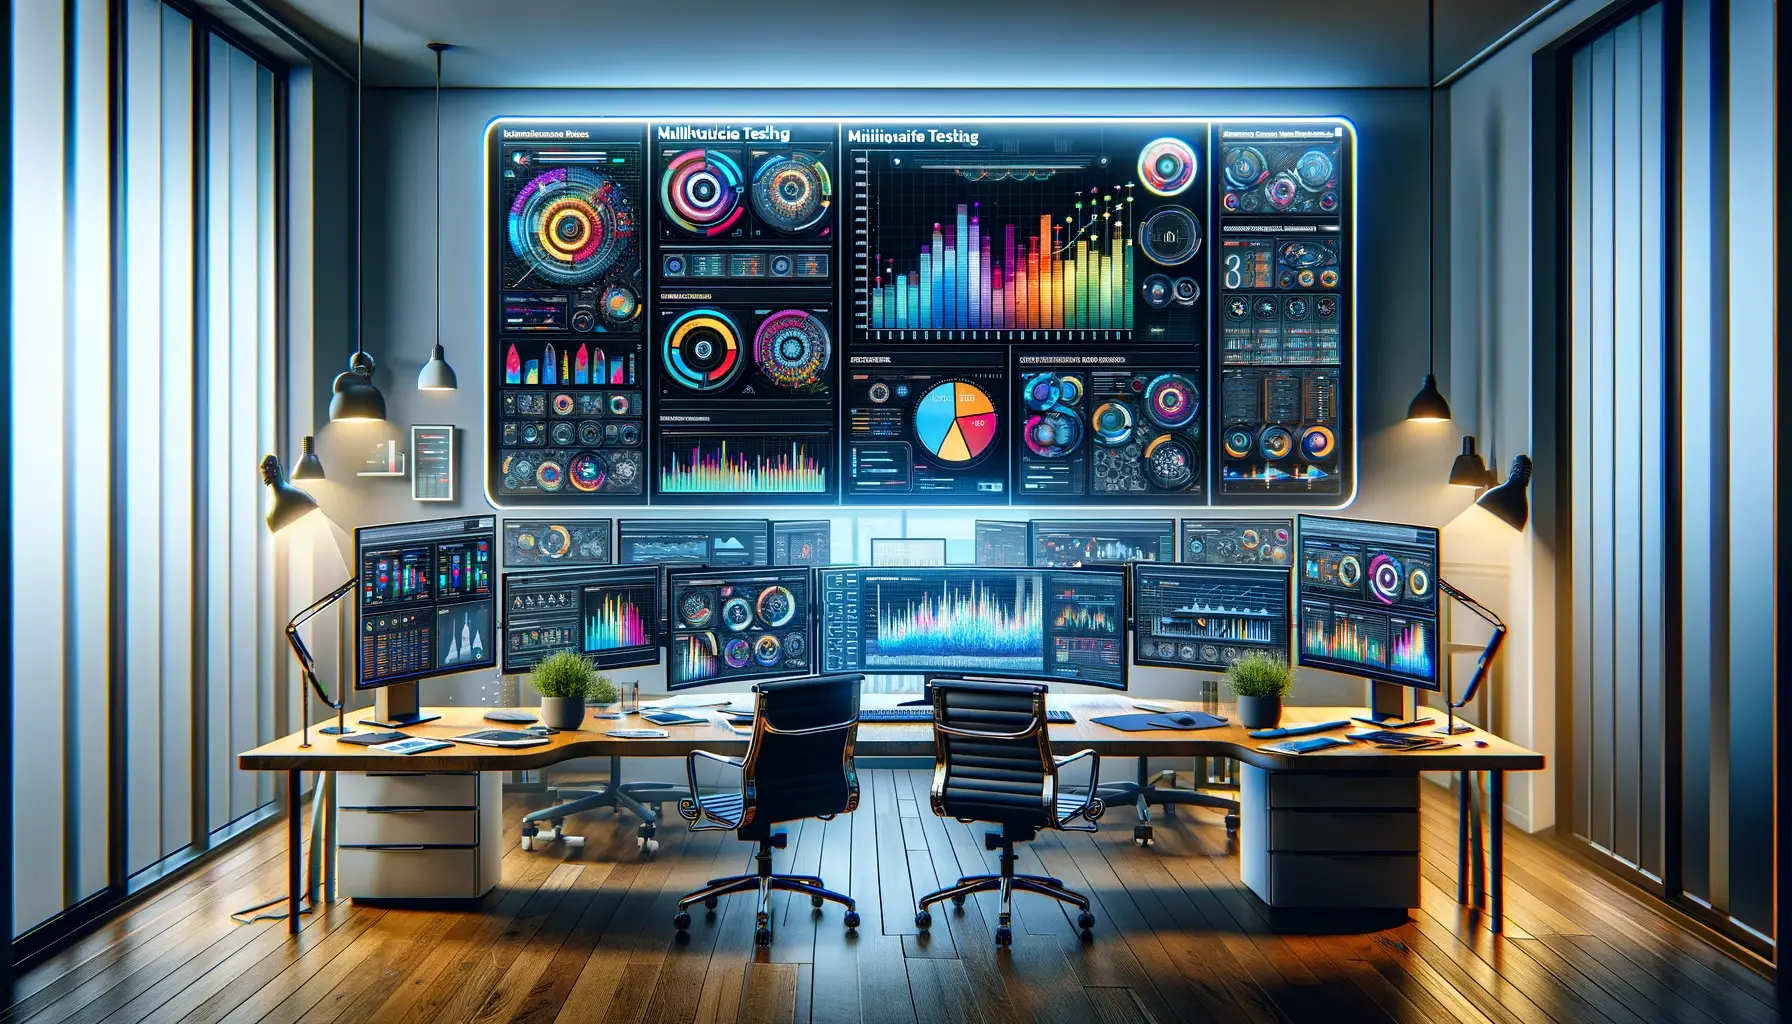 Modern digital workspace with multiple screens displaying graphs, charts, and data analysis tools for multivariate testing